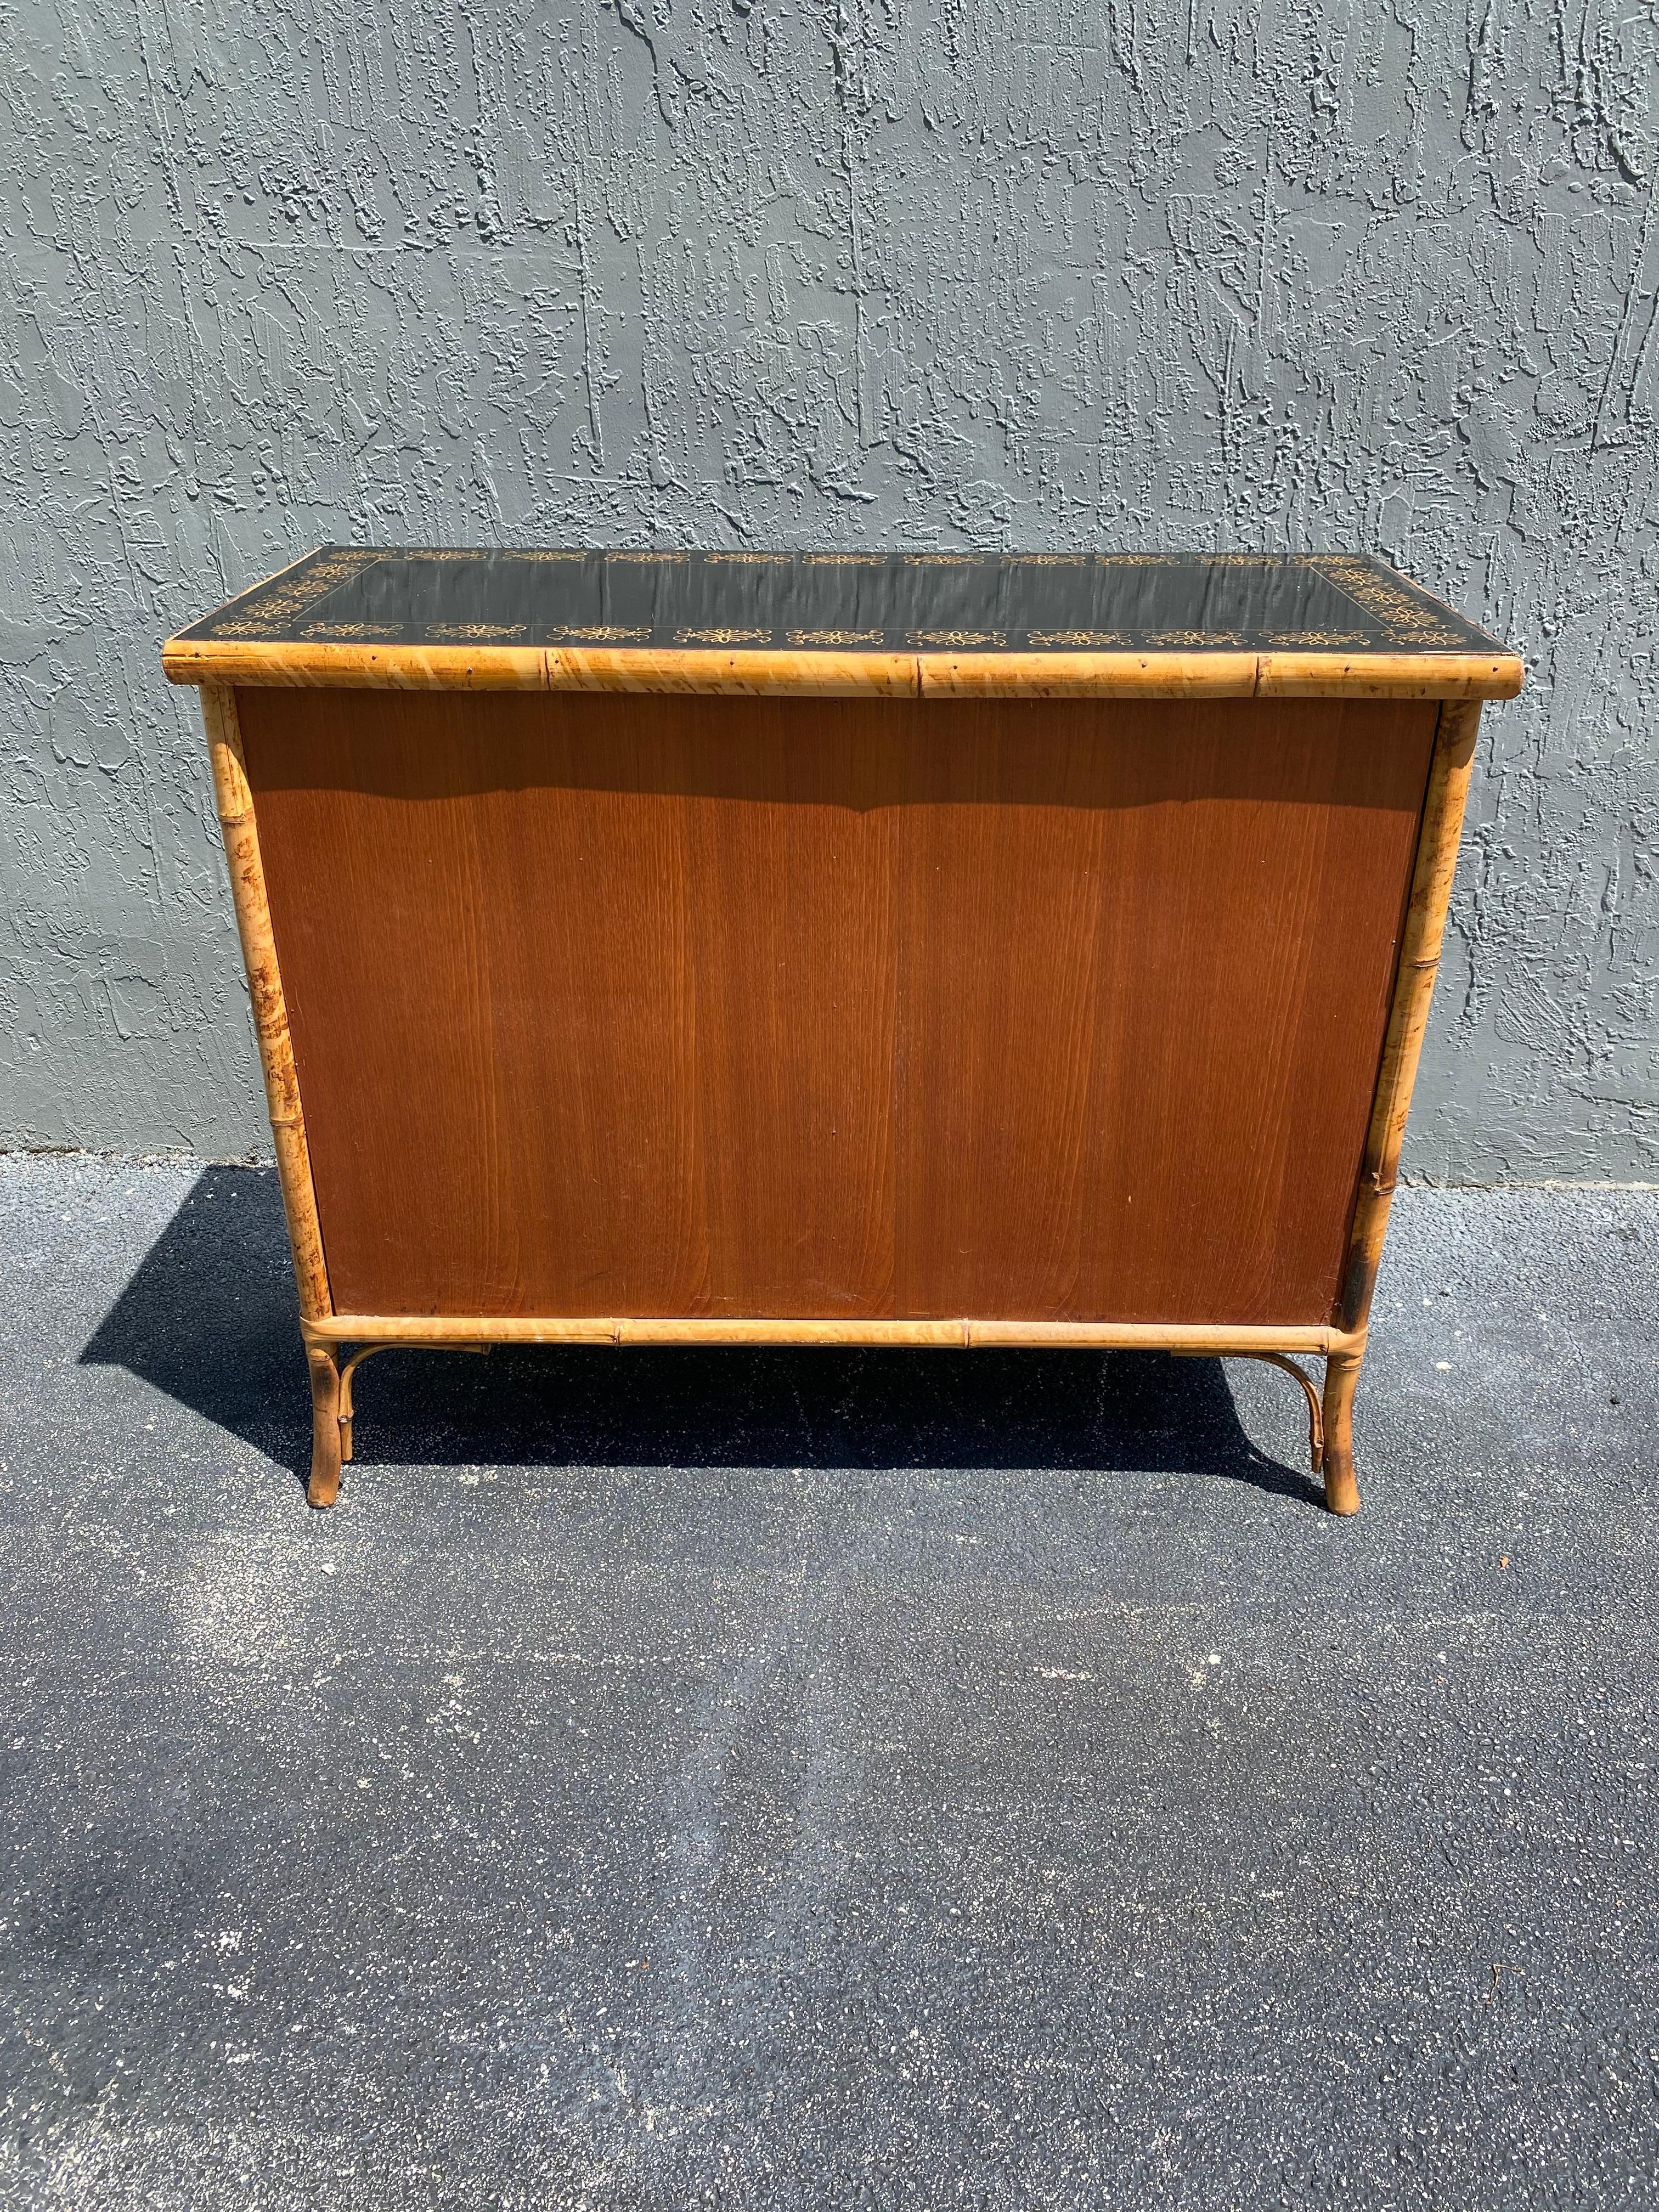 1920s Rattan Chinoiserie Hand Painted Cabinet Mini Sideboard For Sale 6